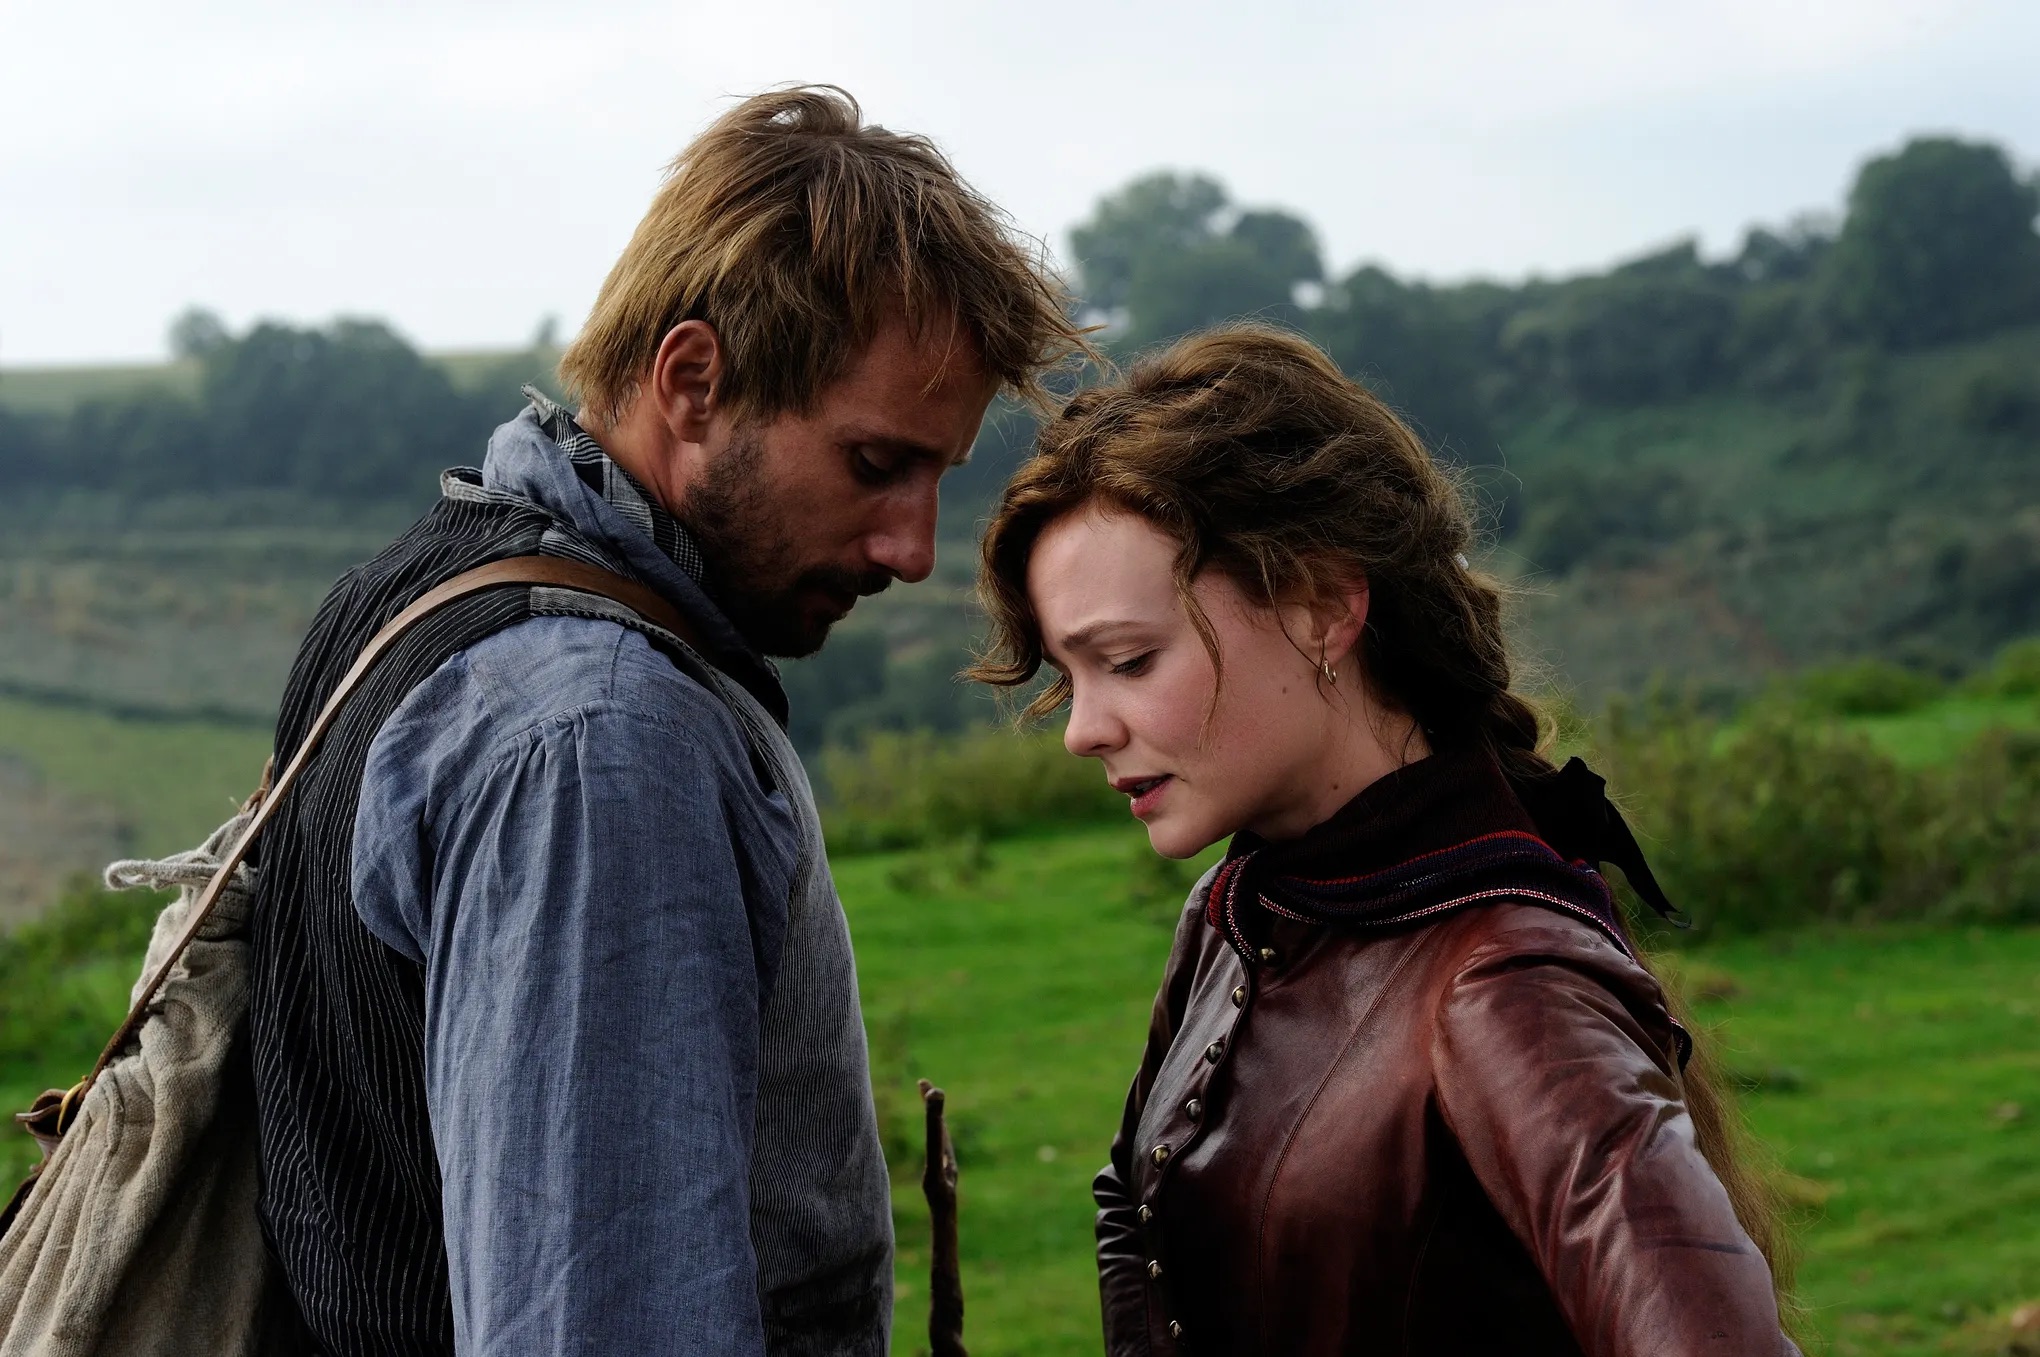  Carey Mulligan and Matthias Schoenaerts in "Far From the Madding Crowd"